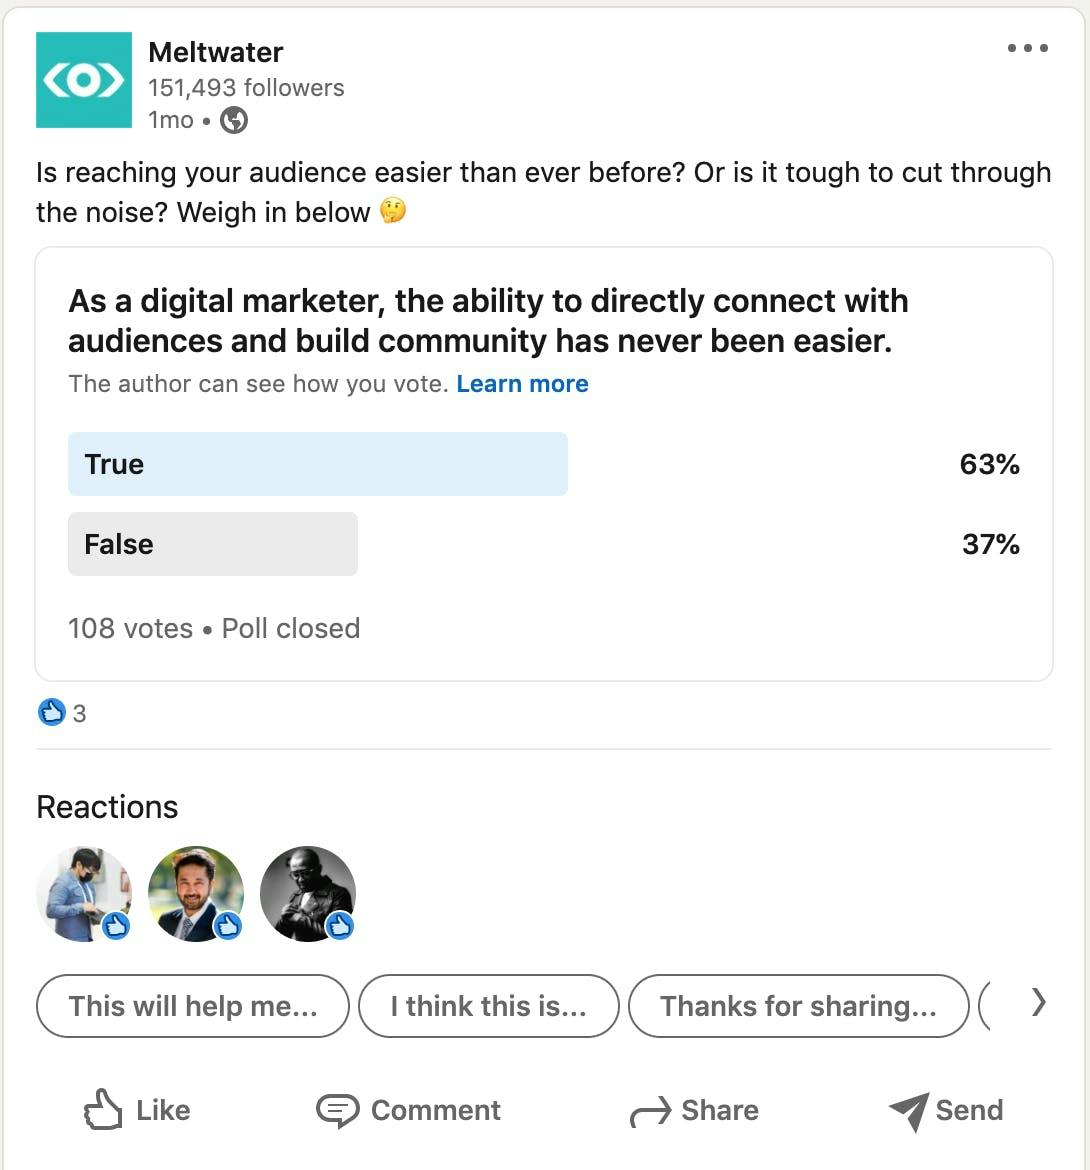 A screenshot of a LinkedIn poll posted by Meltwater asking, "As a digital marketer, the ability to connect with audiences and build community has never been easier". 65% of respondents said this statement was "True".